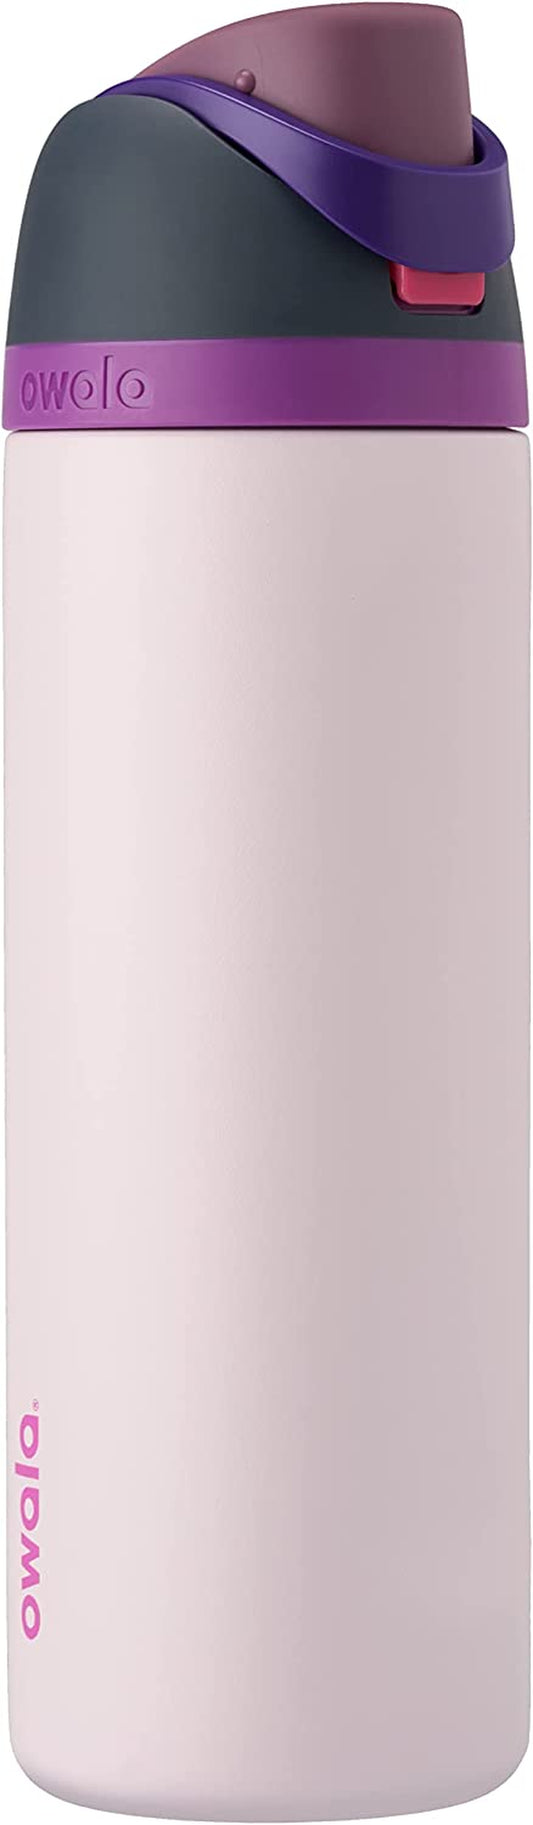 Freesip Insulated Stainless Steel Water Bottle with Straw for Sports and Travel, Bpa-Free, 24Oz, Dreamy Field